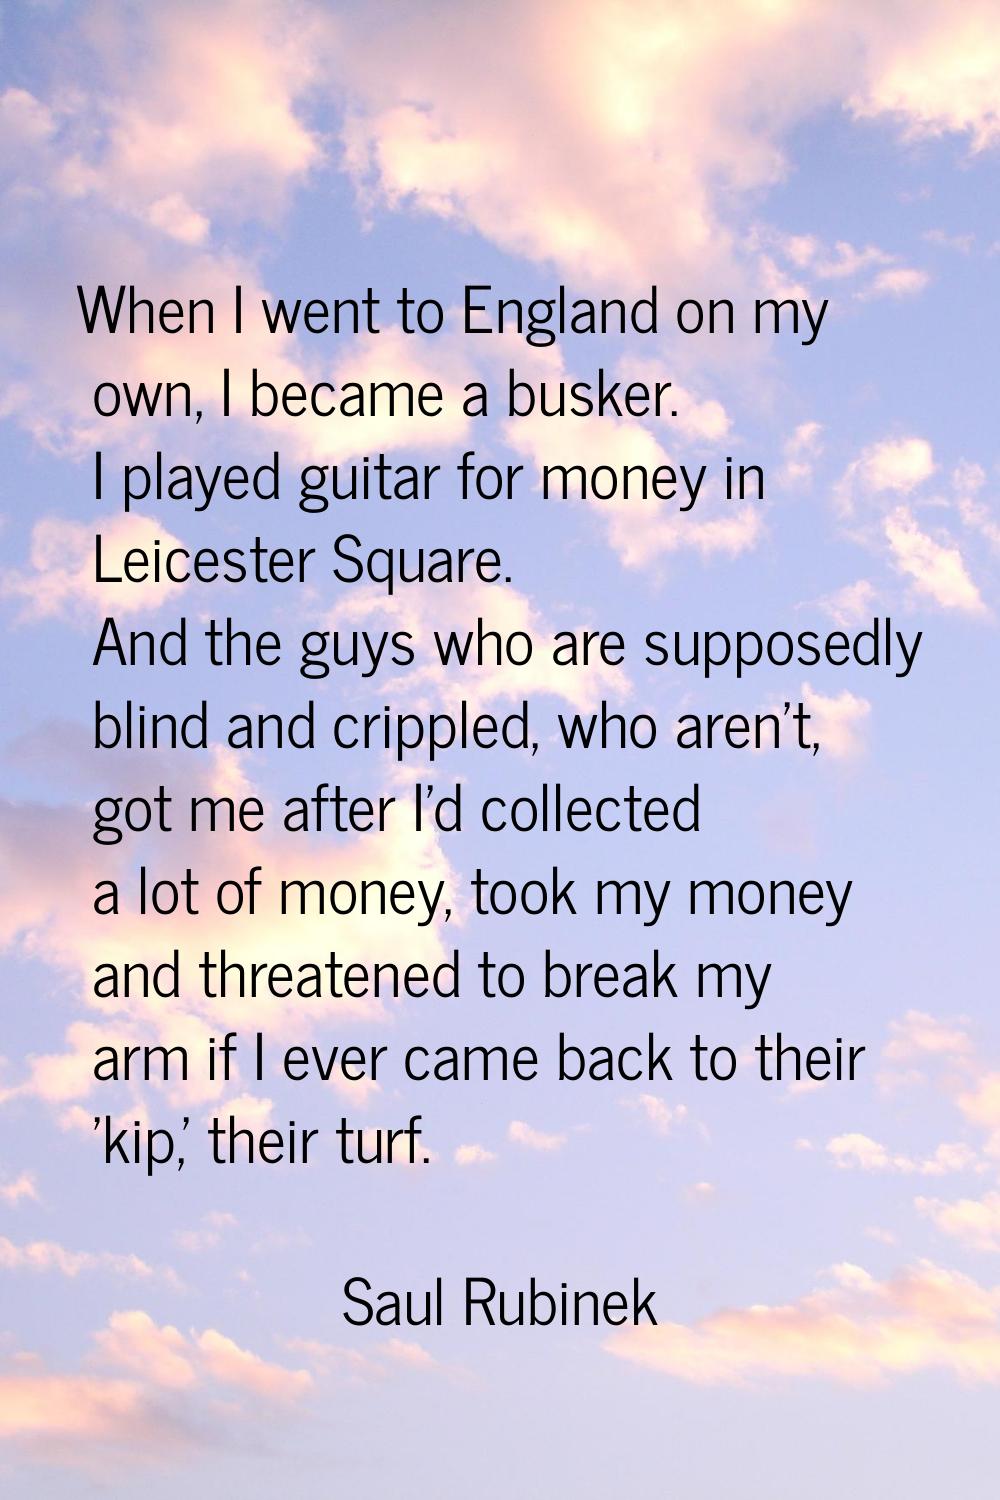 When I went to England on my own, I became a busker. I played guitar for money in Leicester Square.